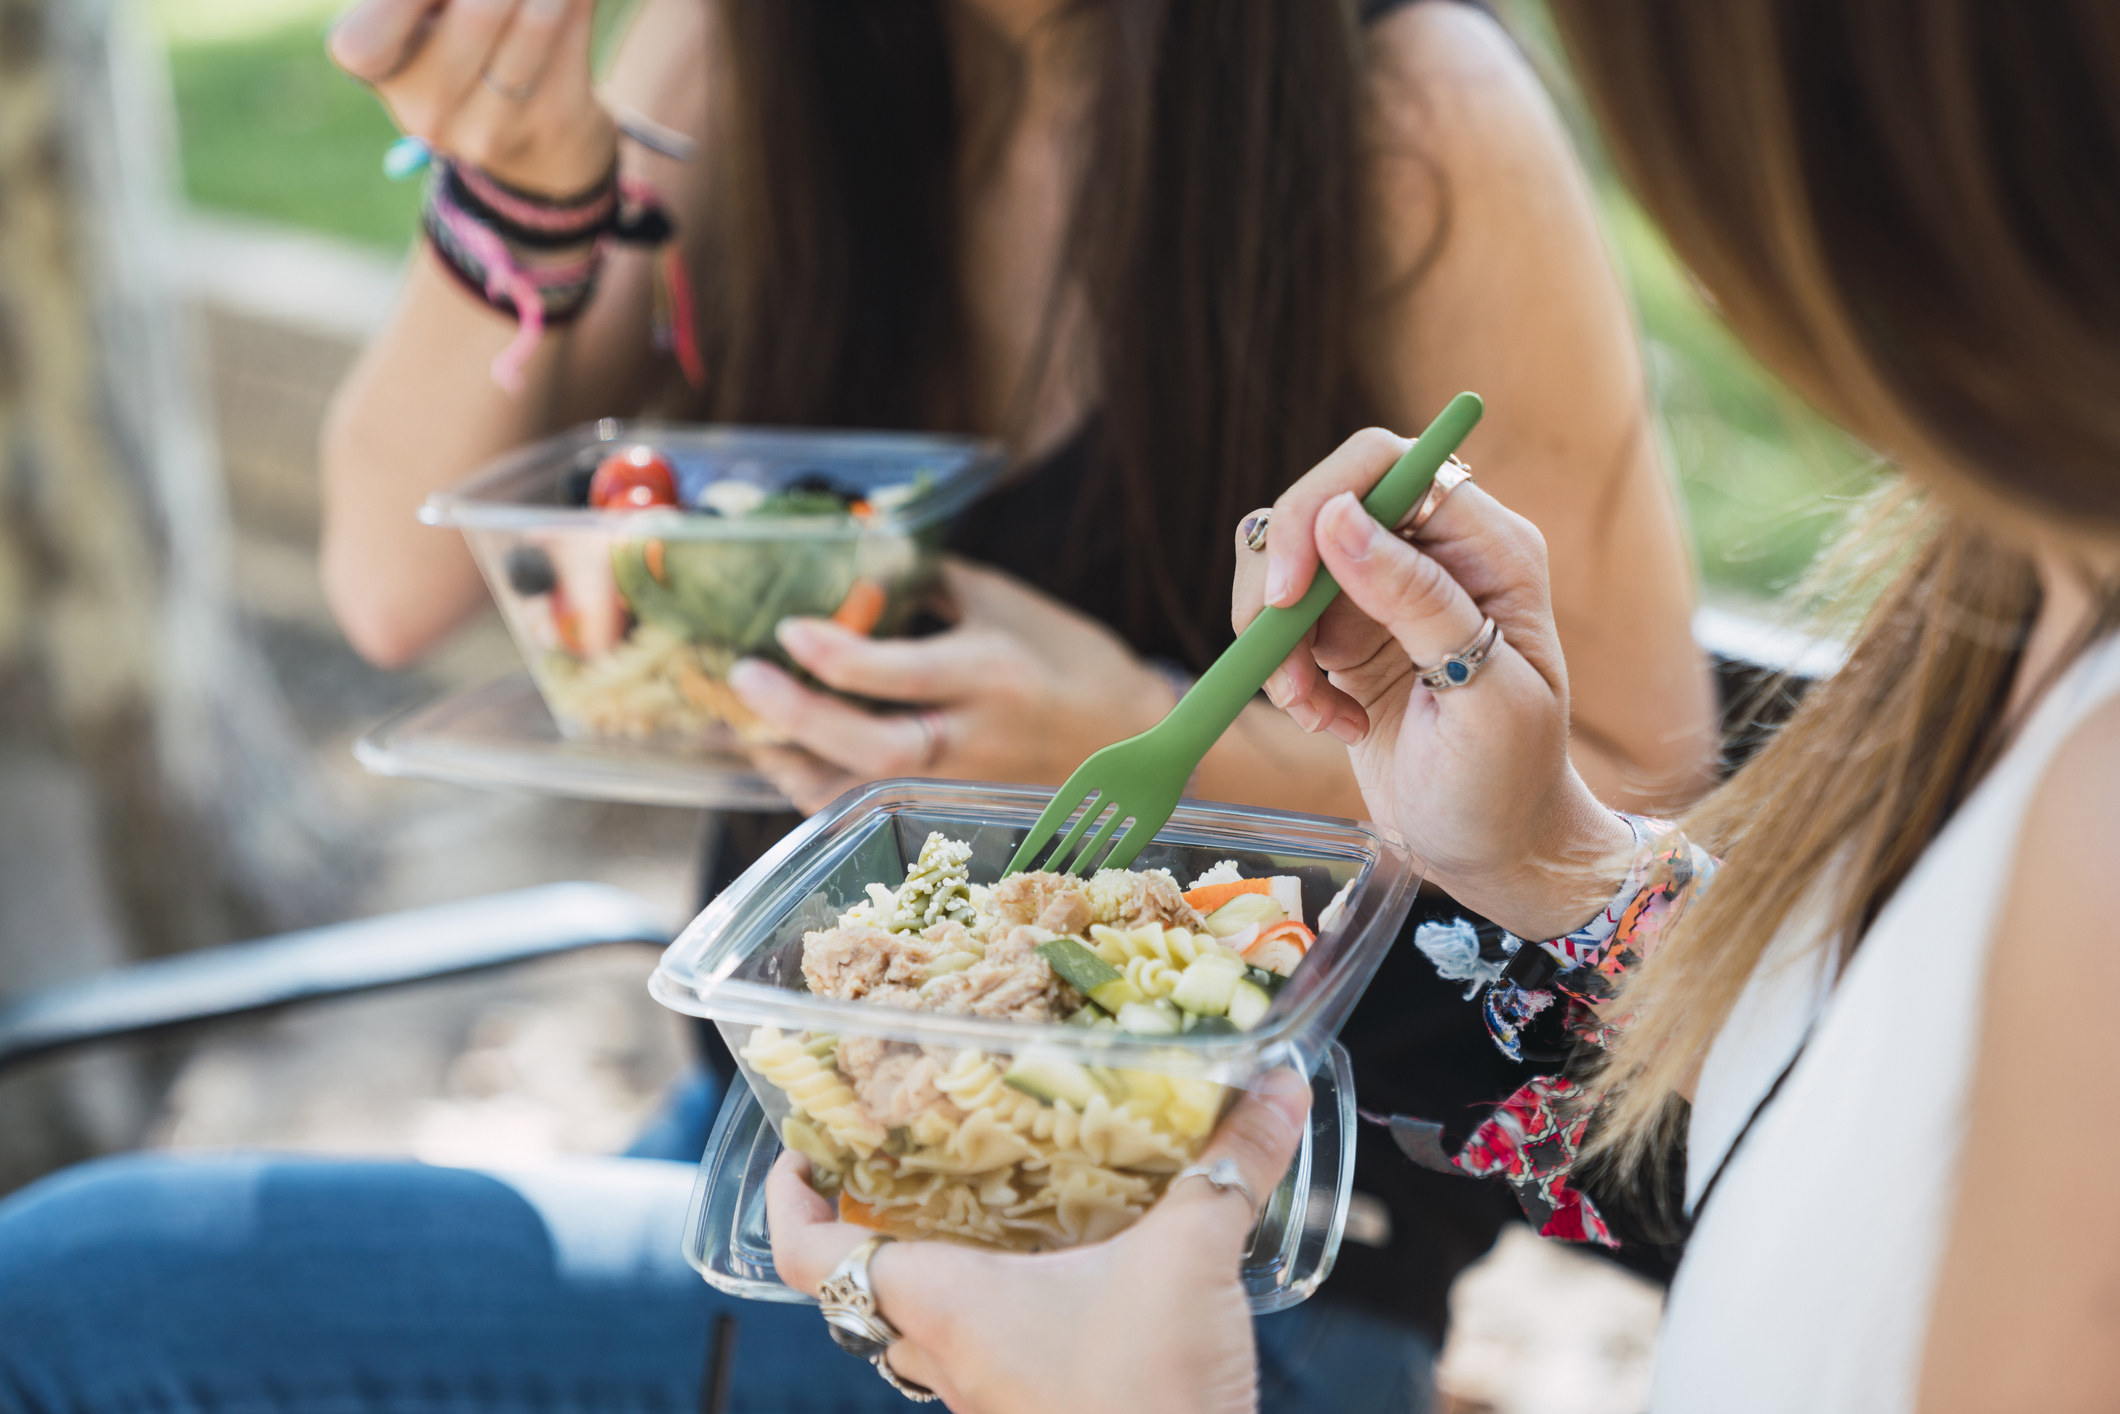 people eating salads from a plastic container